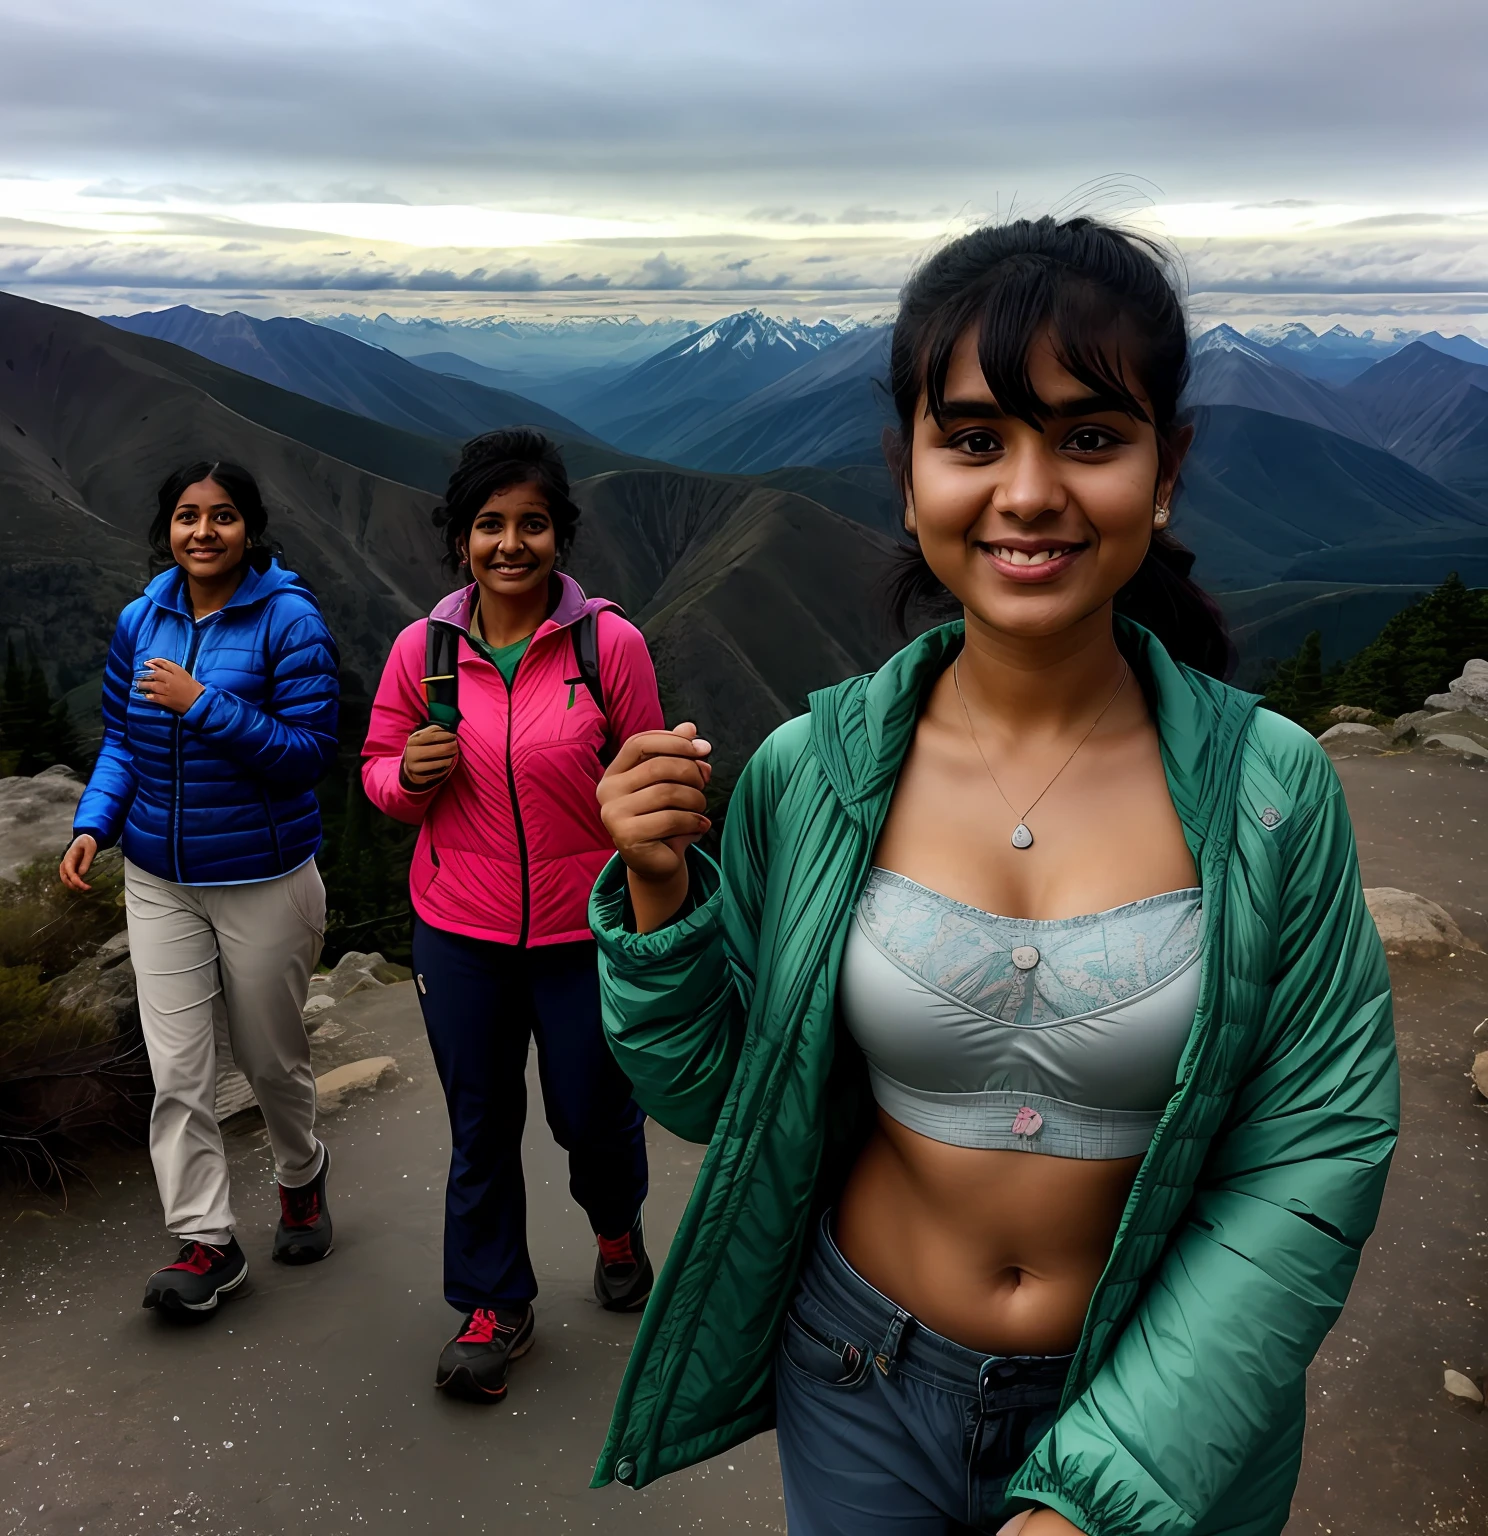 Indian woman hiker at the mountaintop, cold weather clothes, jacket opened to show strapless bra, plumpy, no abs, updo, standing, in a group of people